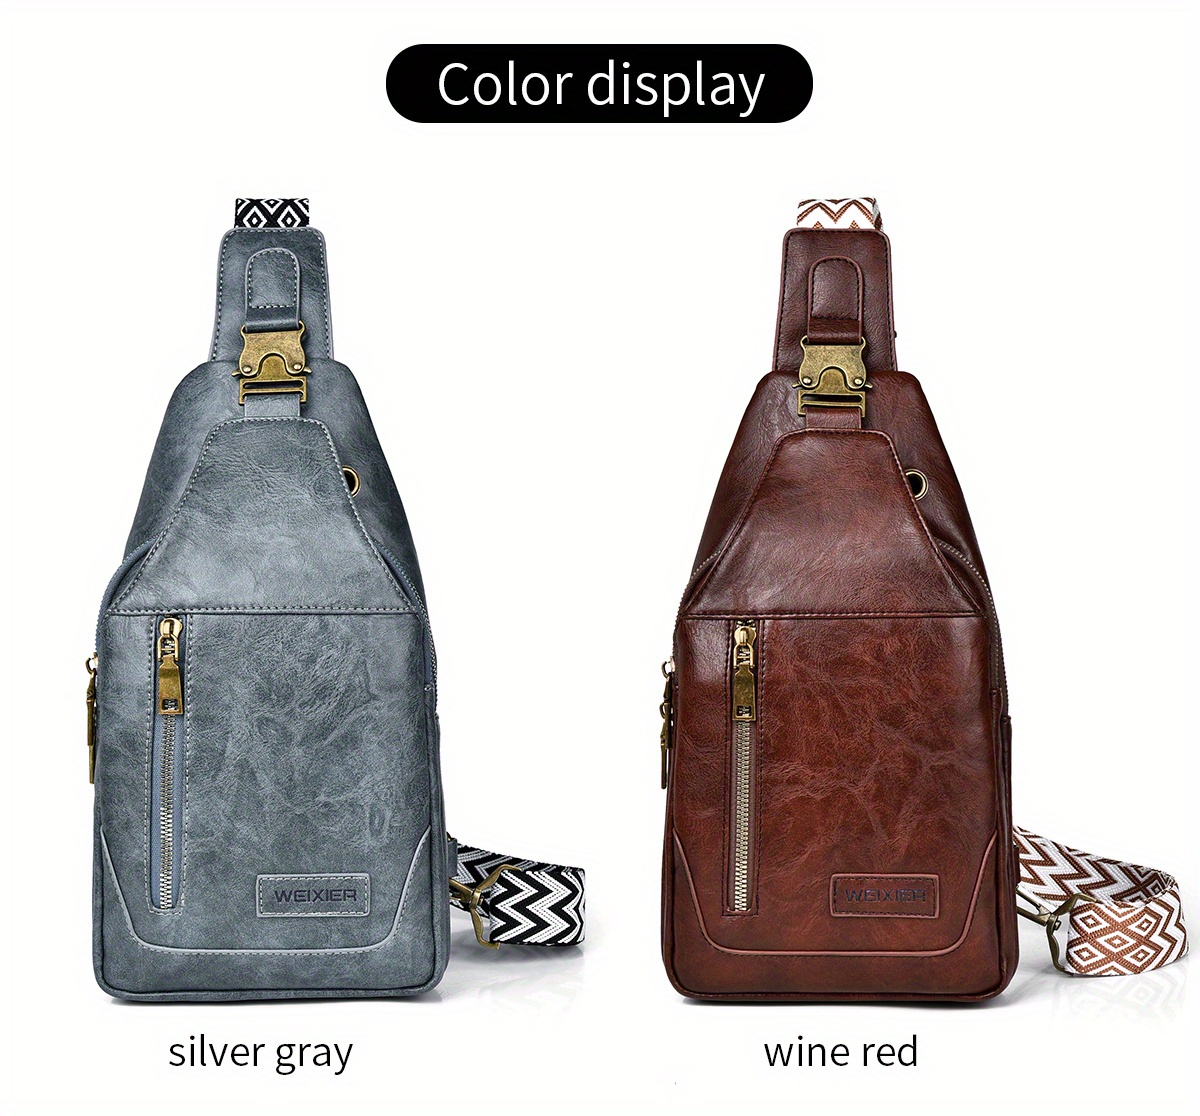 Retro Style Sling Bag With Release Buckle, Bohemian Strap Crossbody Bag, PU Leather Chest Bag For Work & Travel ebc890-62 Upg...